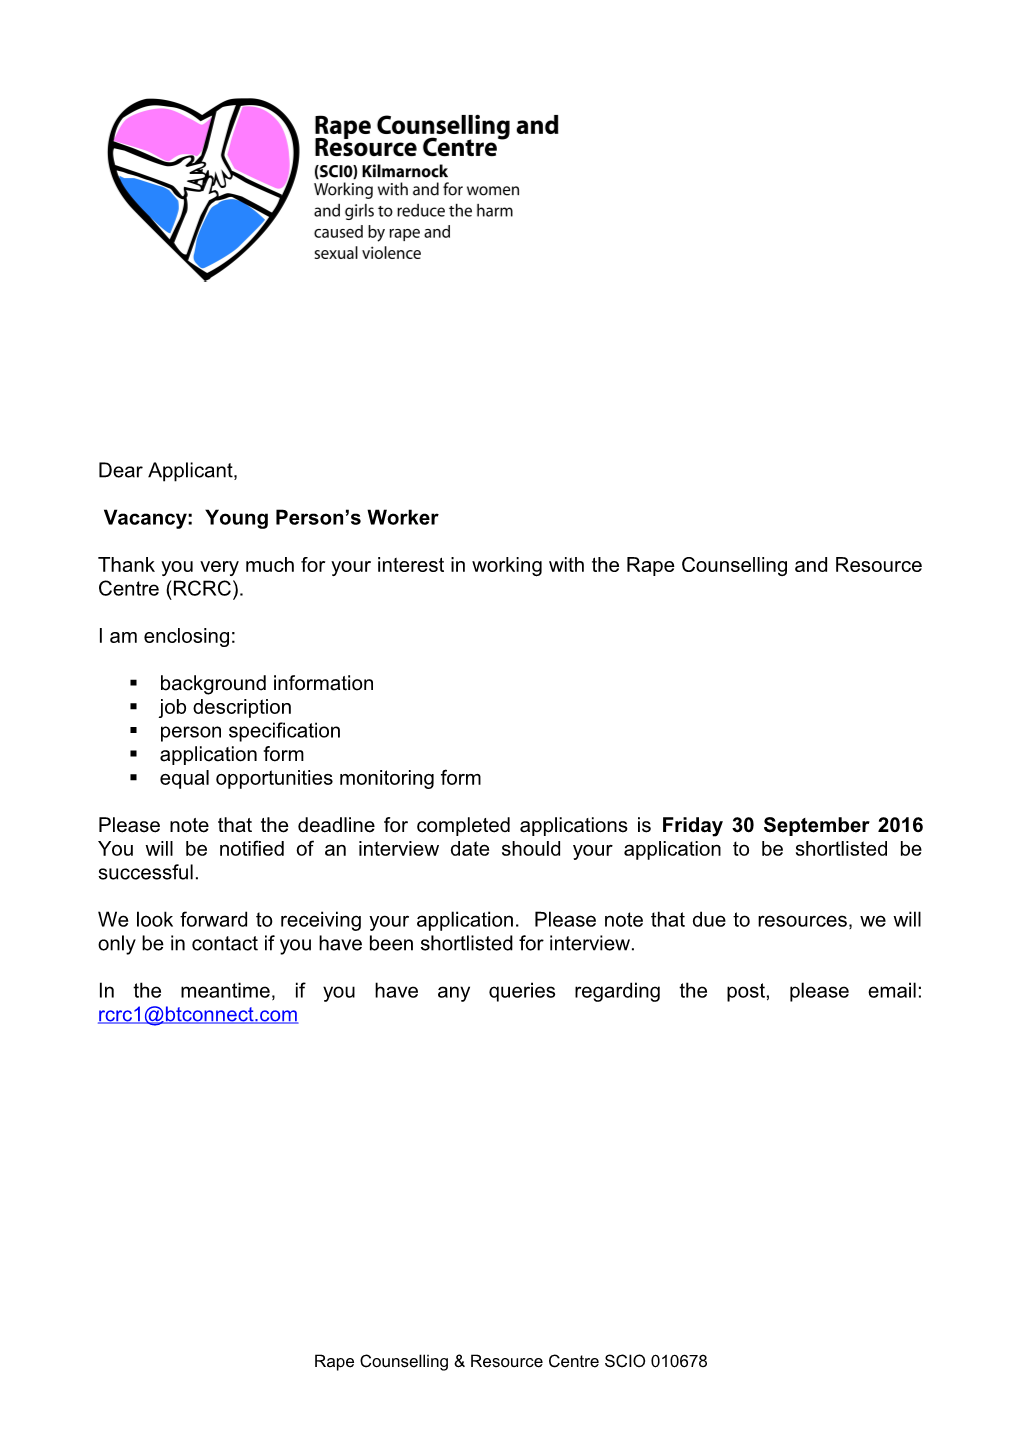 Vacancy: Young Person S Worker